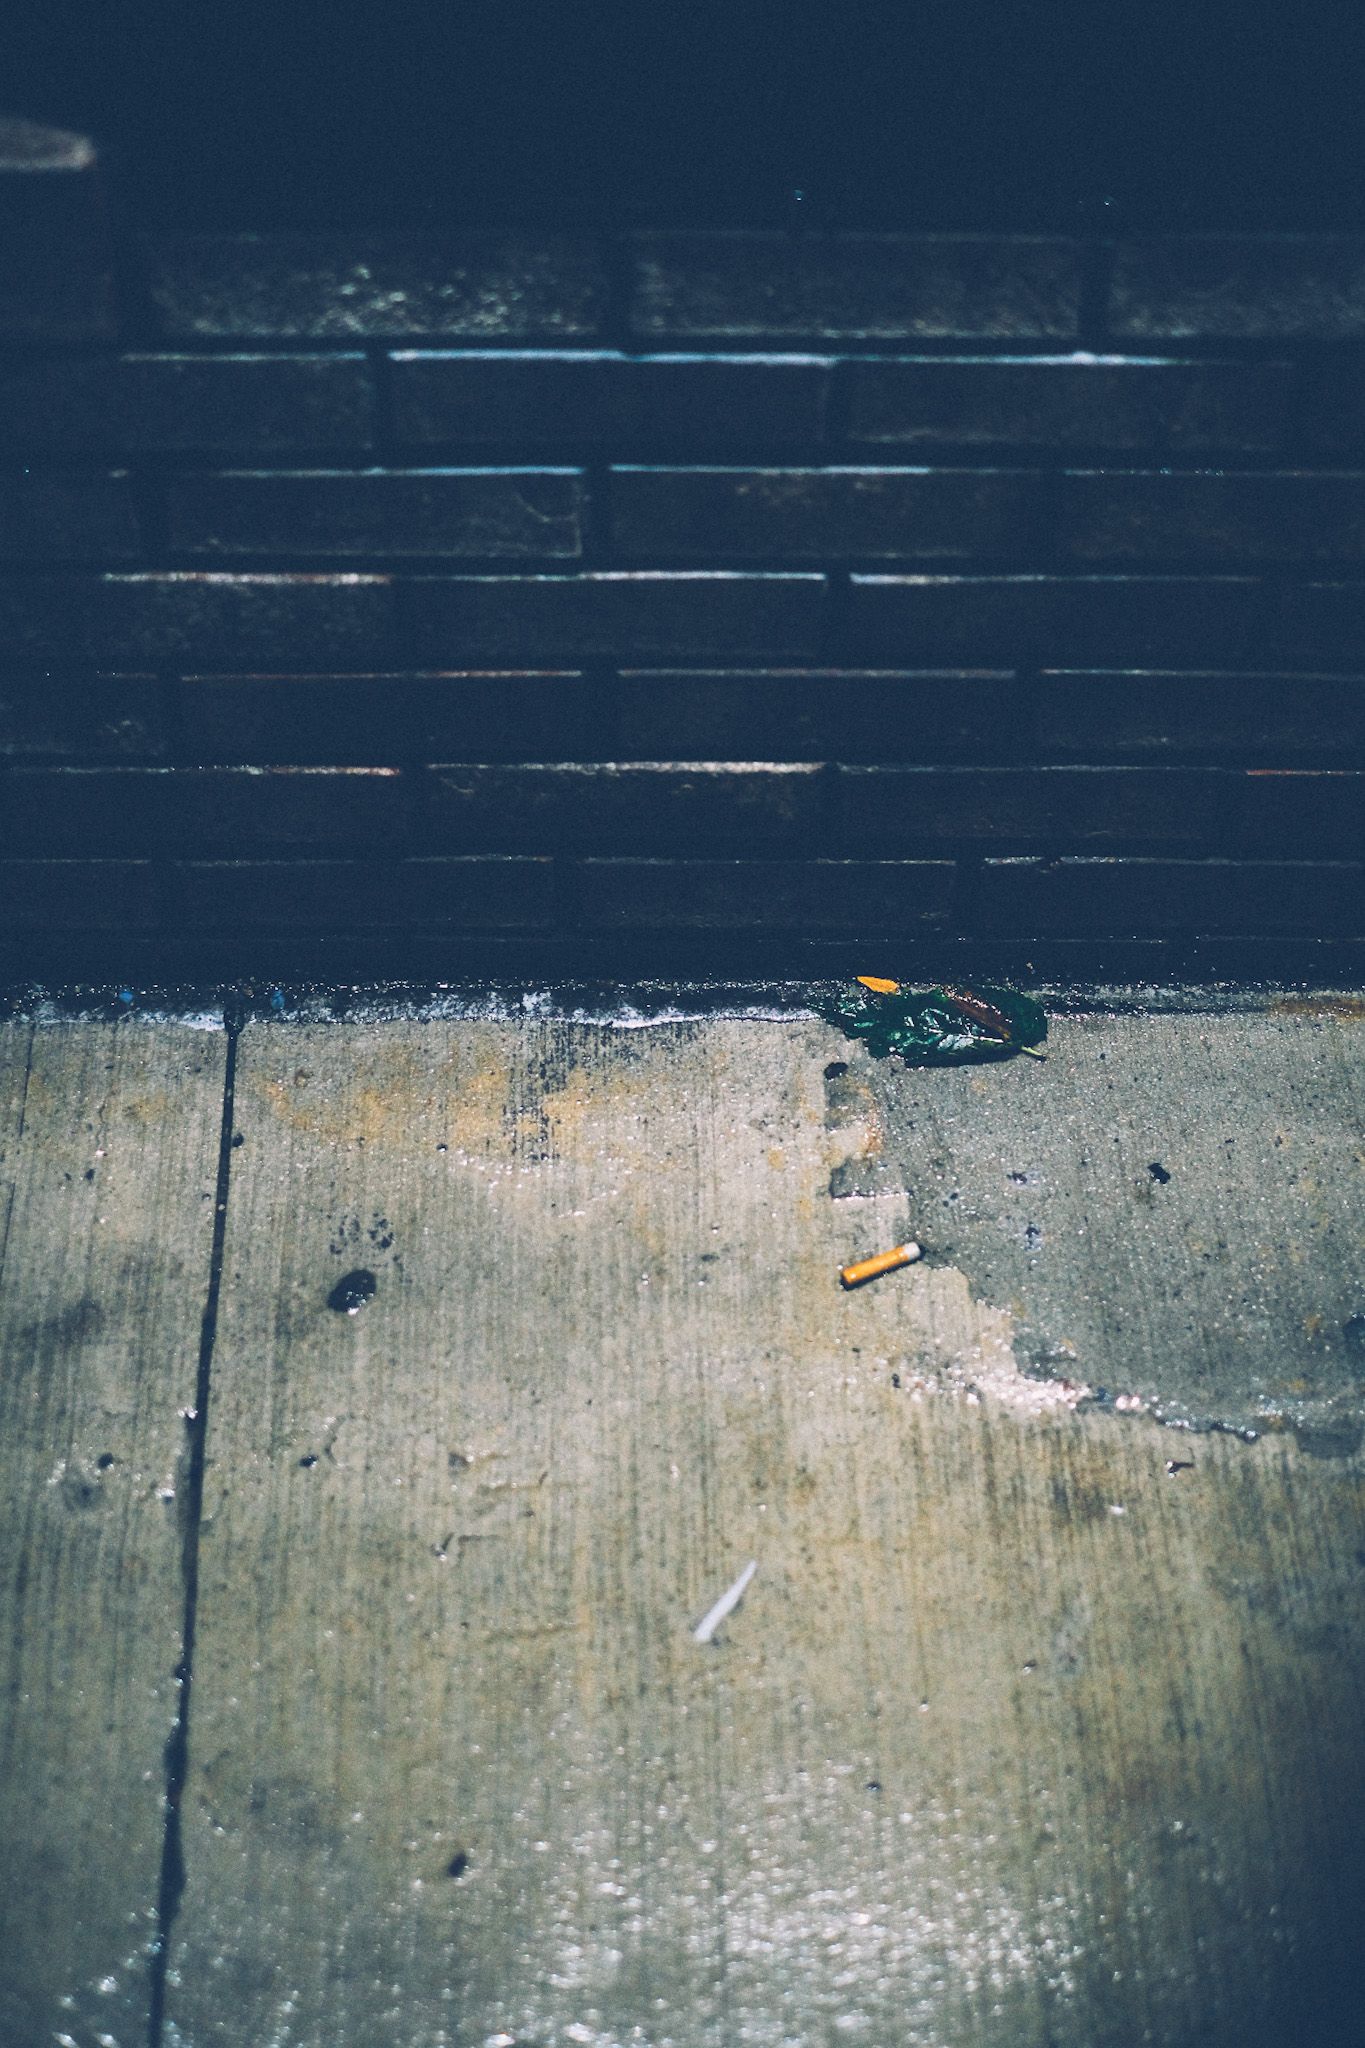 A cigarette sits on a wet sidewalk beside a brick wall at night, illuminated by street light.